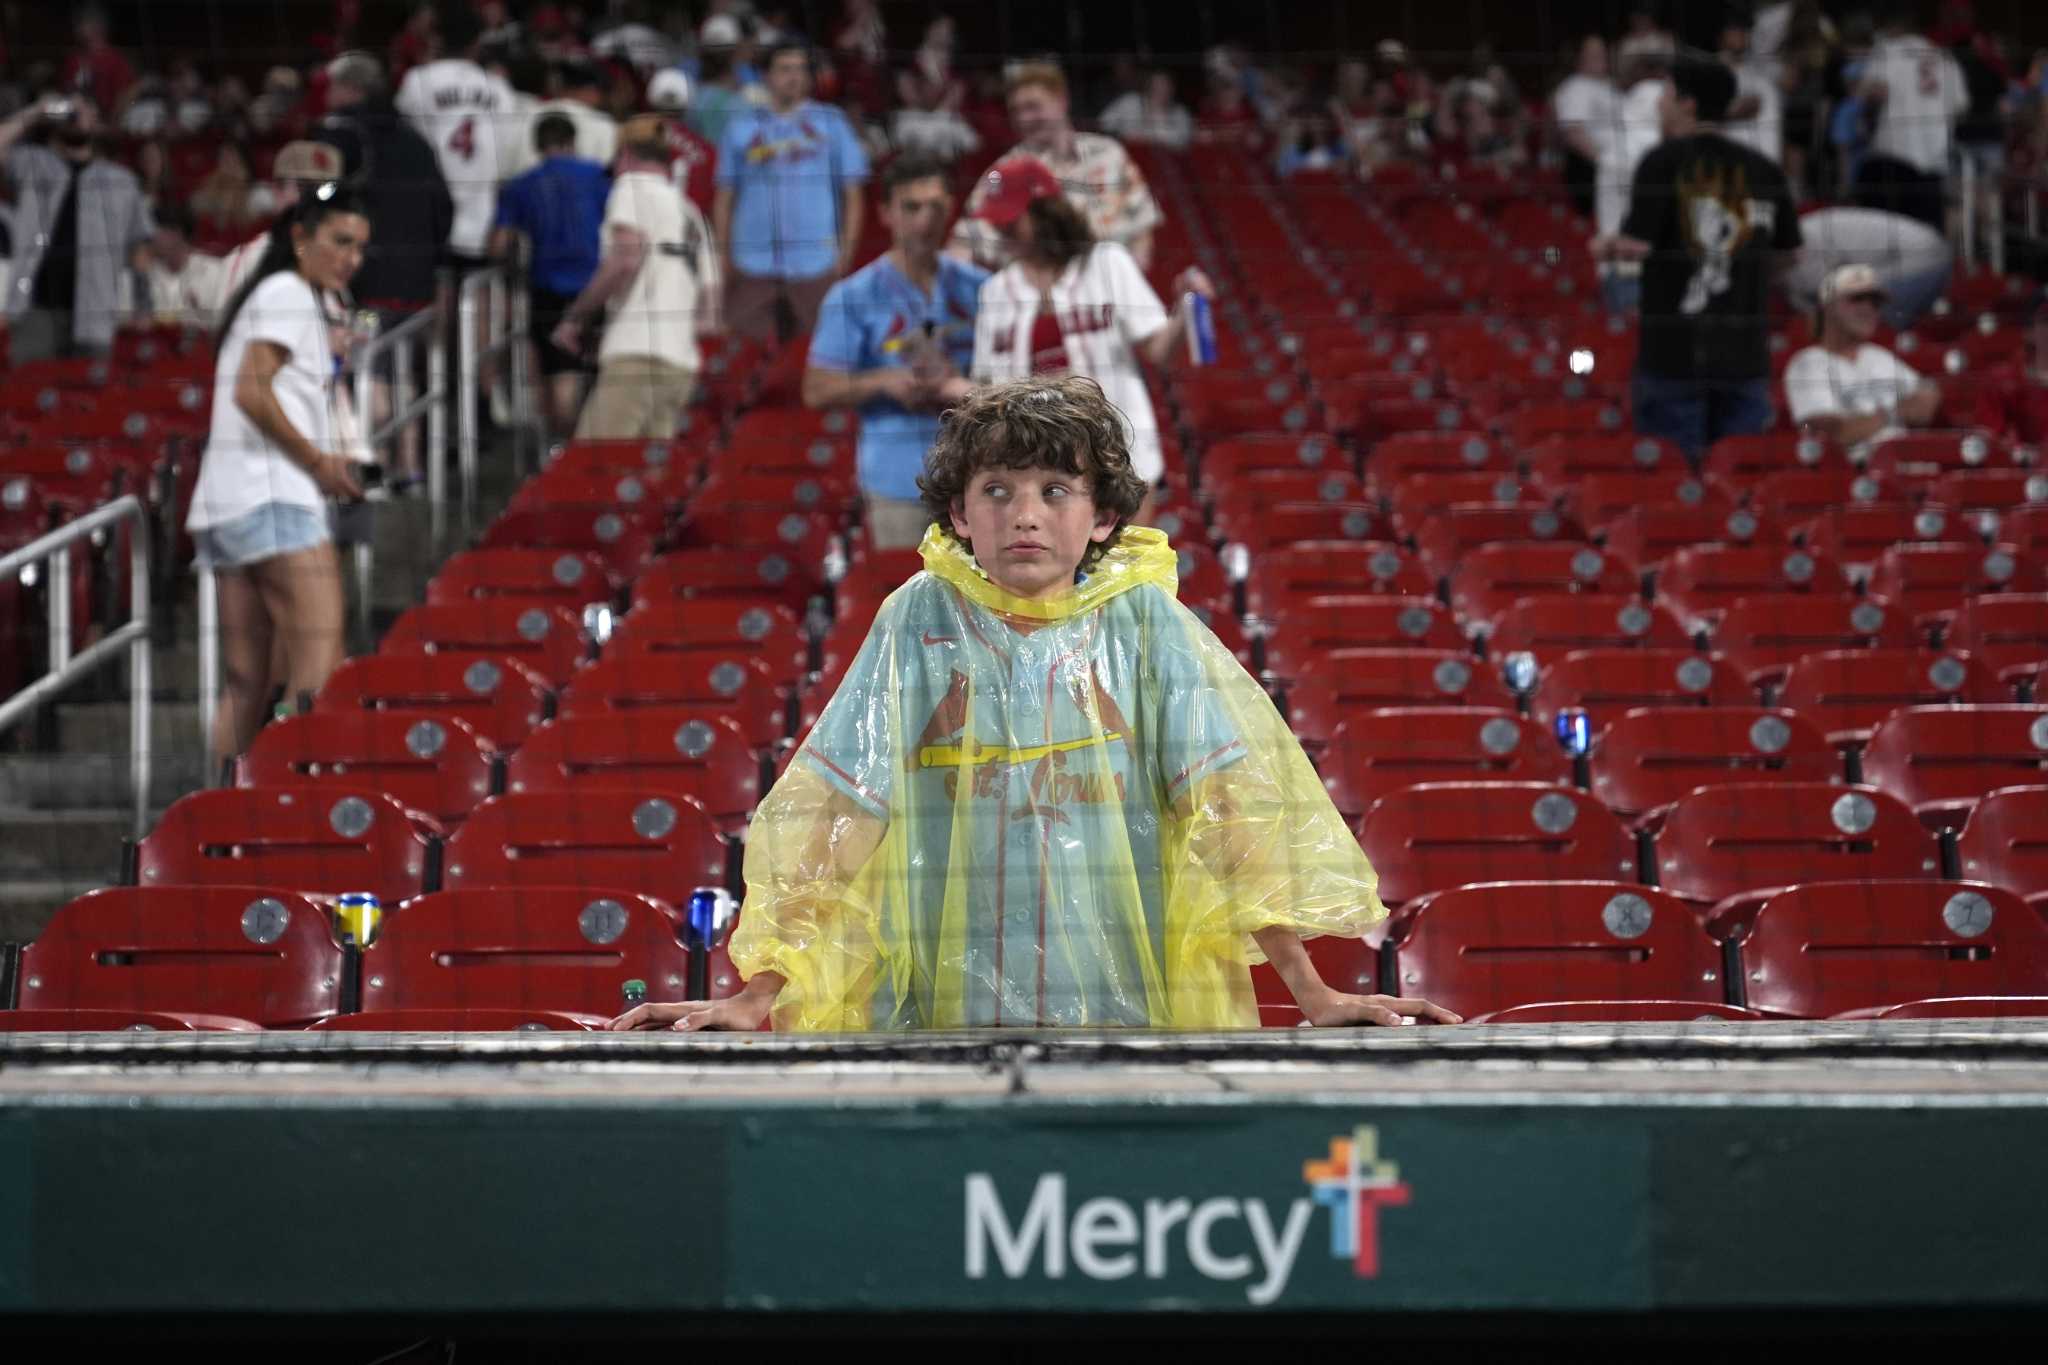 Cardinals-Orioles suspended in 6th inning due to rain, will be completed Wednesday